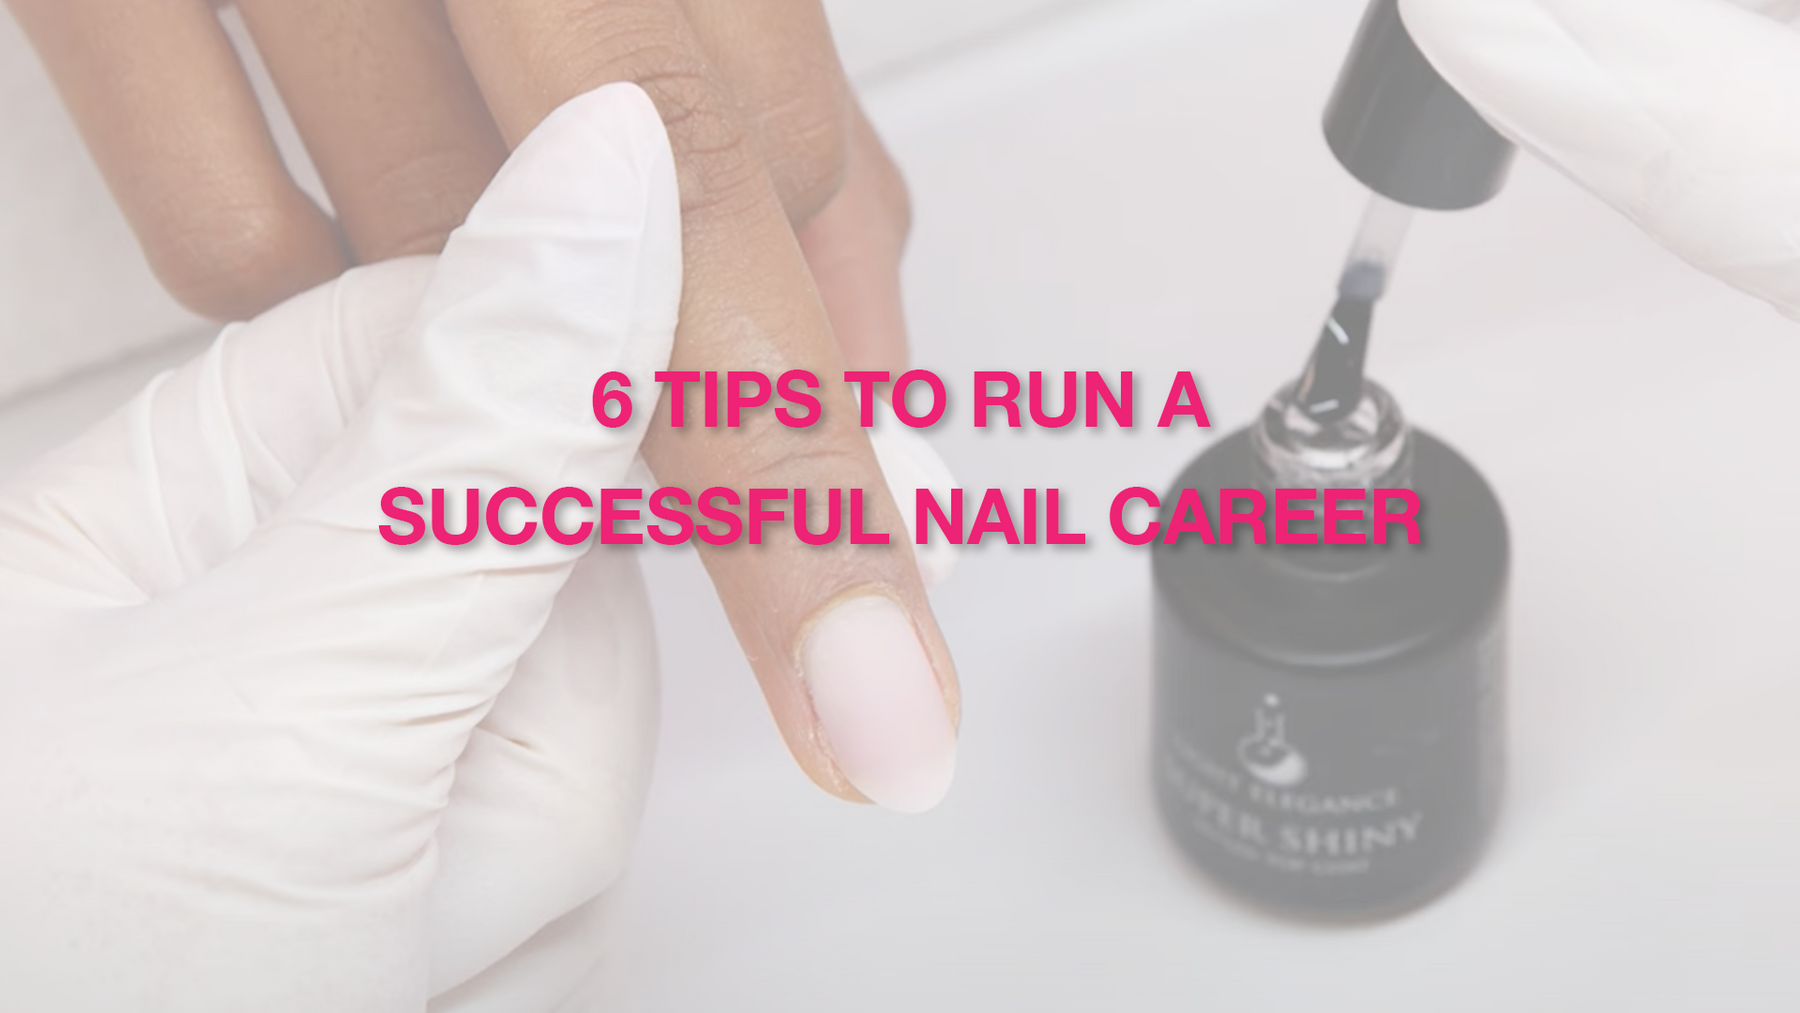 Top 6 Tips for How to Run a Successful Nail Career and Business | Nail Tech Business | Nail Professional | Nail Salon Advice